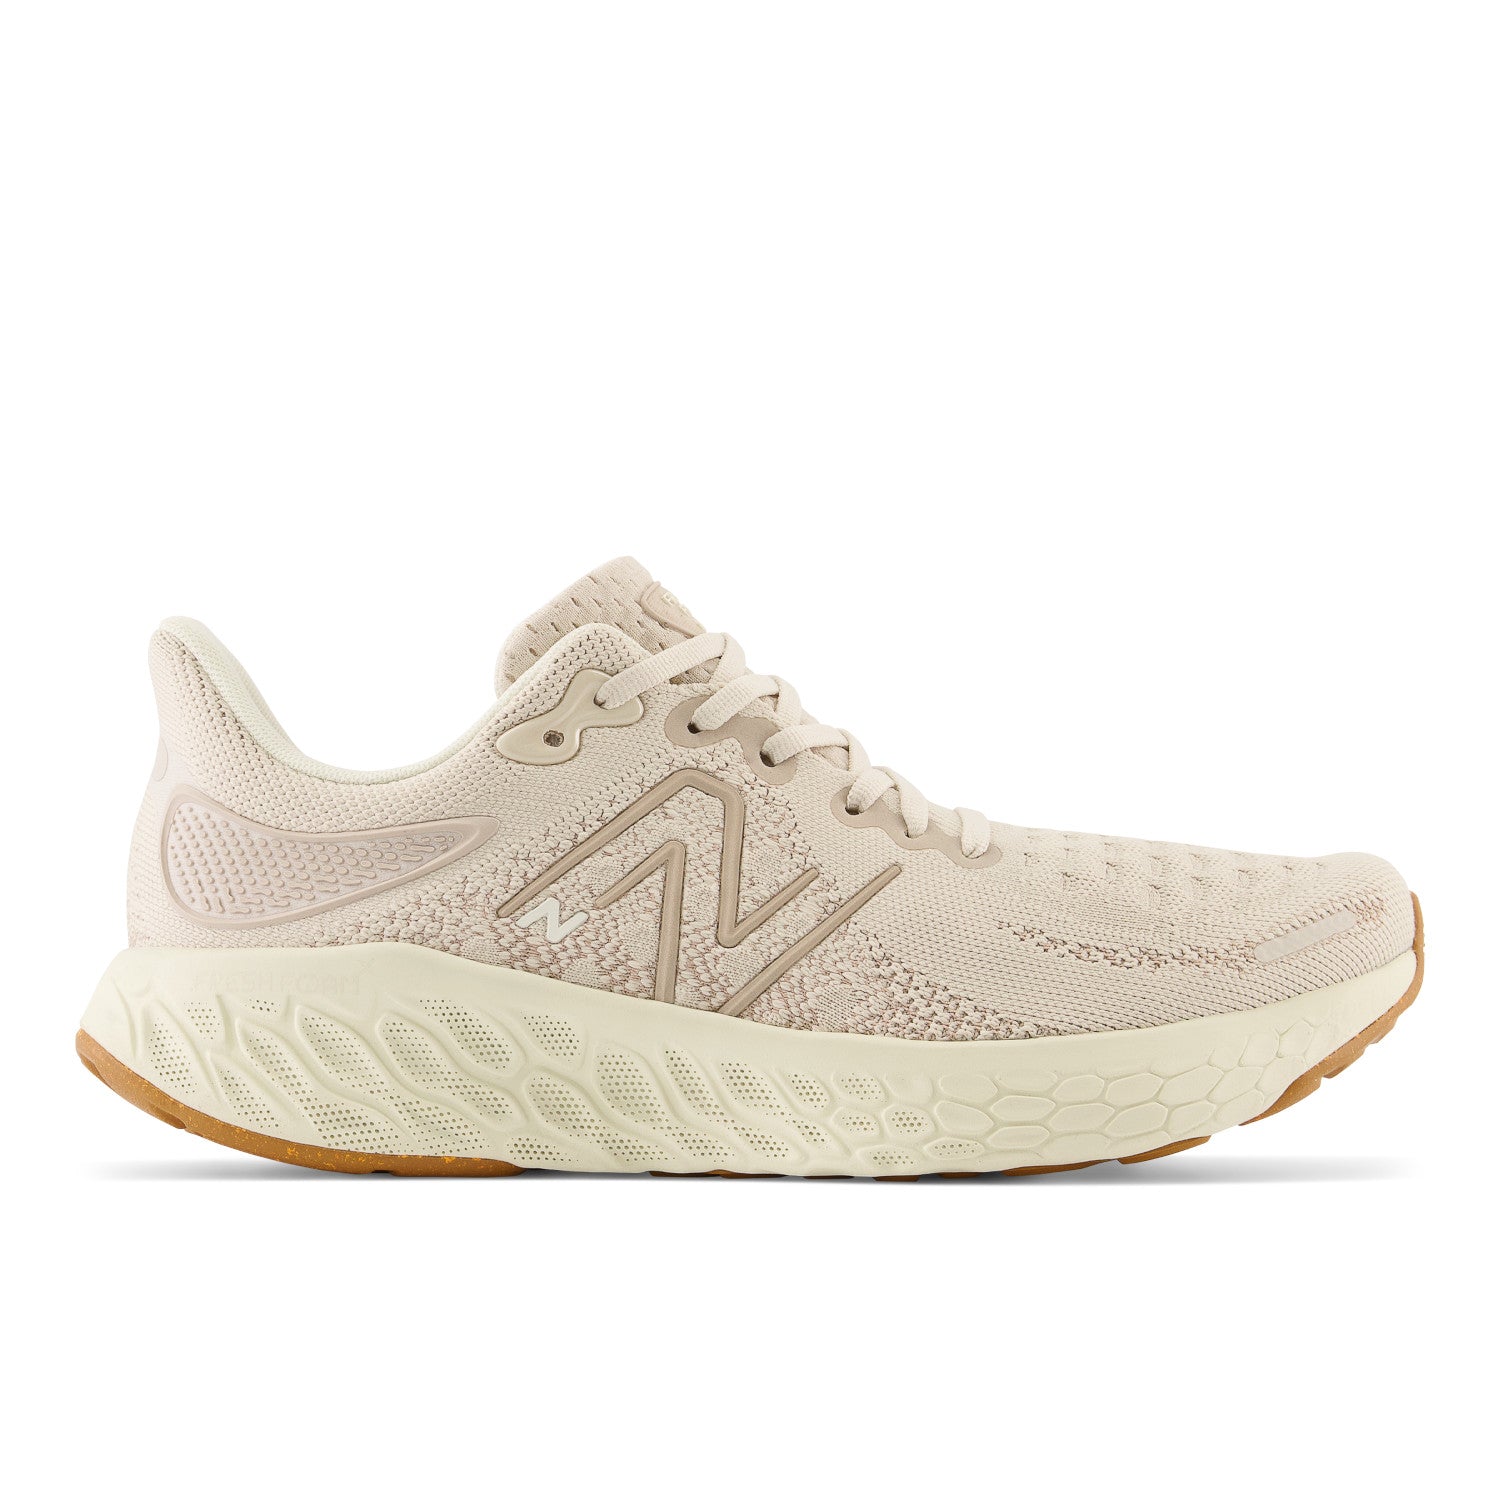 Men's New Balance Fresh Foam X 1080v12 Lounge Around Color: Timberwolf with Turtledove and Mindful Grey